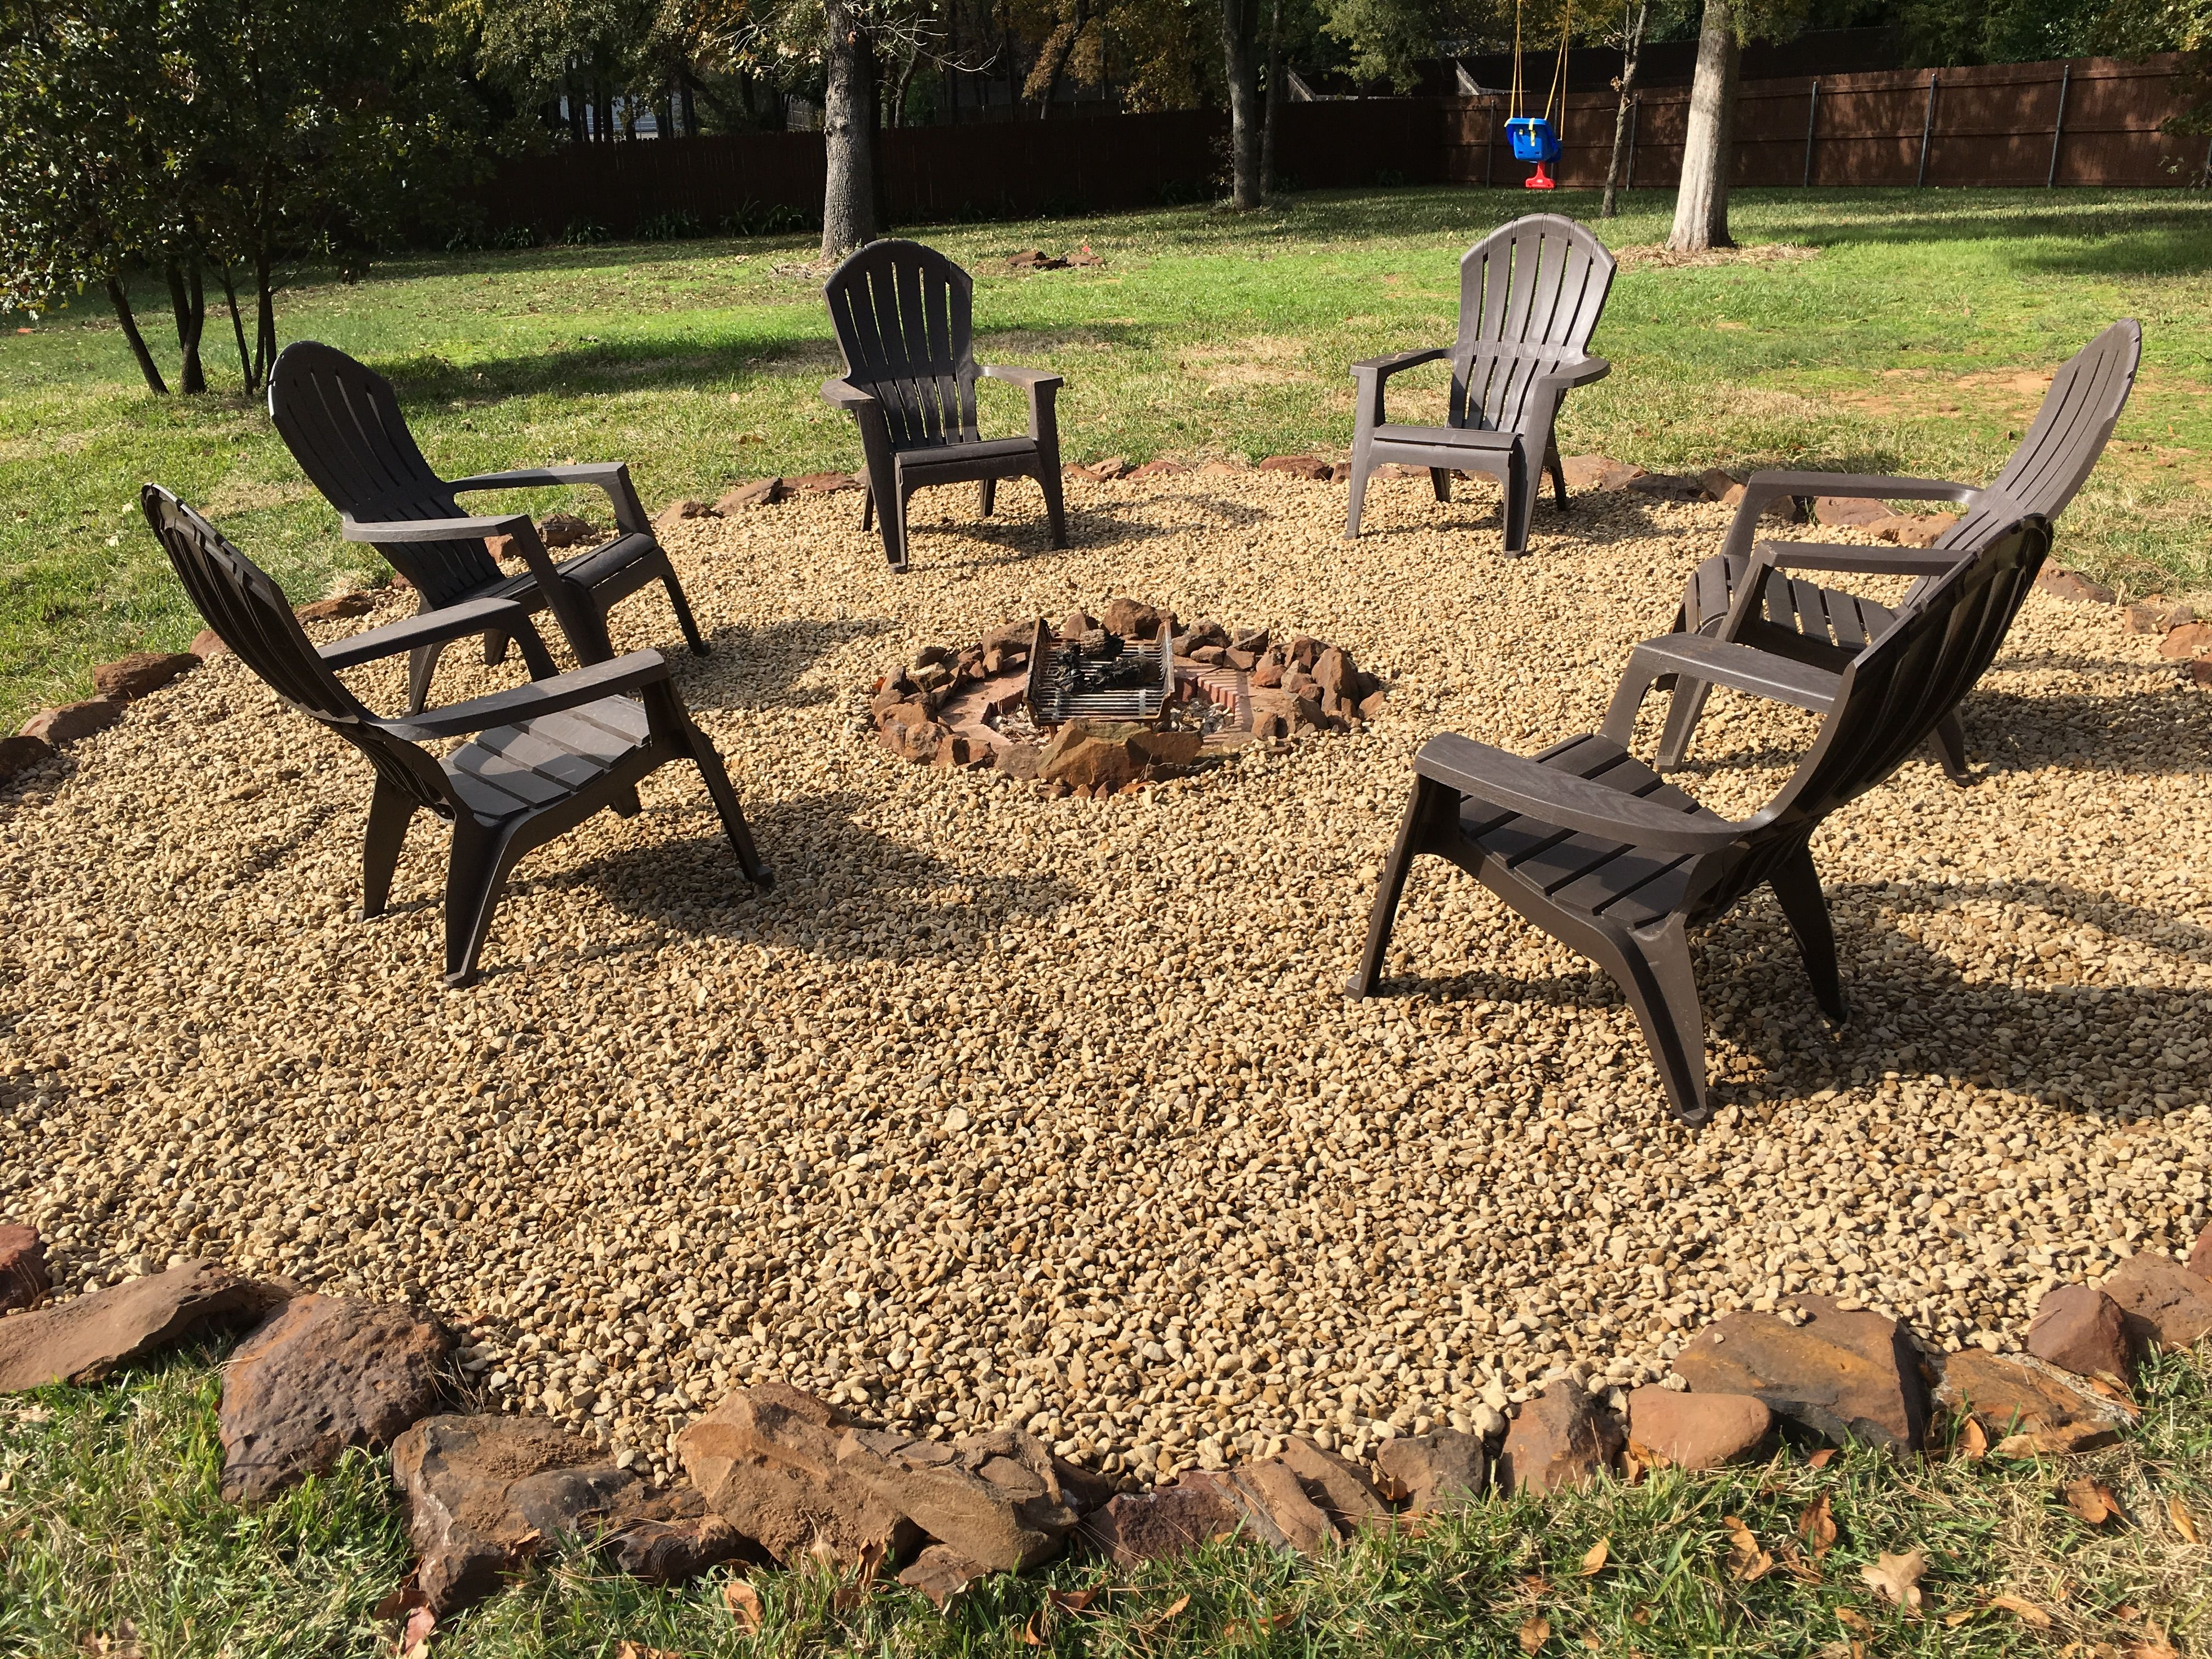 Fire Pit With Rock Surround Fire Pit Backyard Outside within dimensions 4032 X 3024